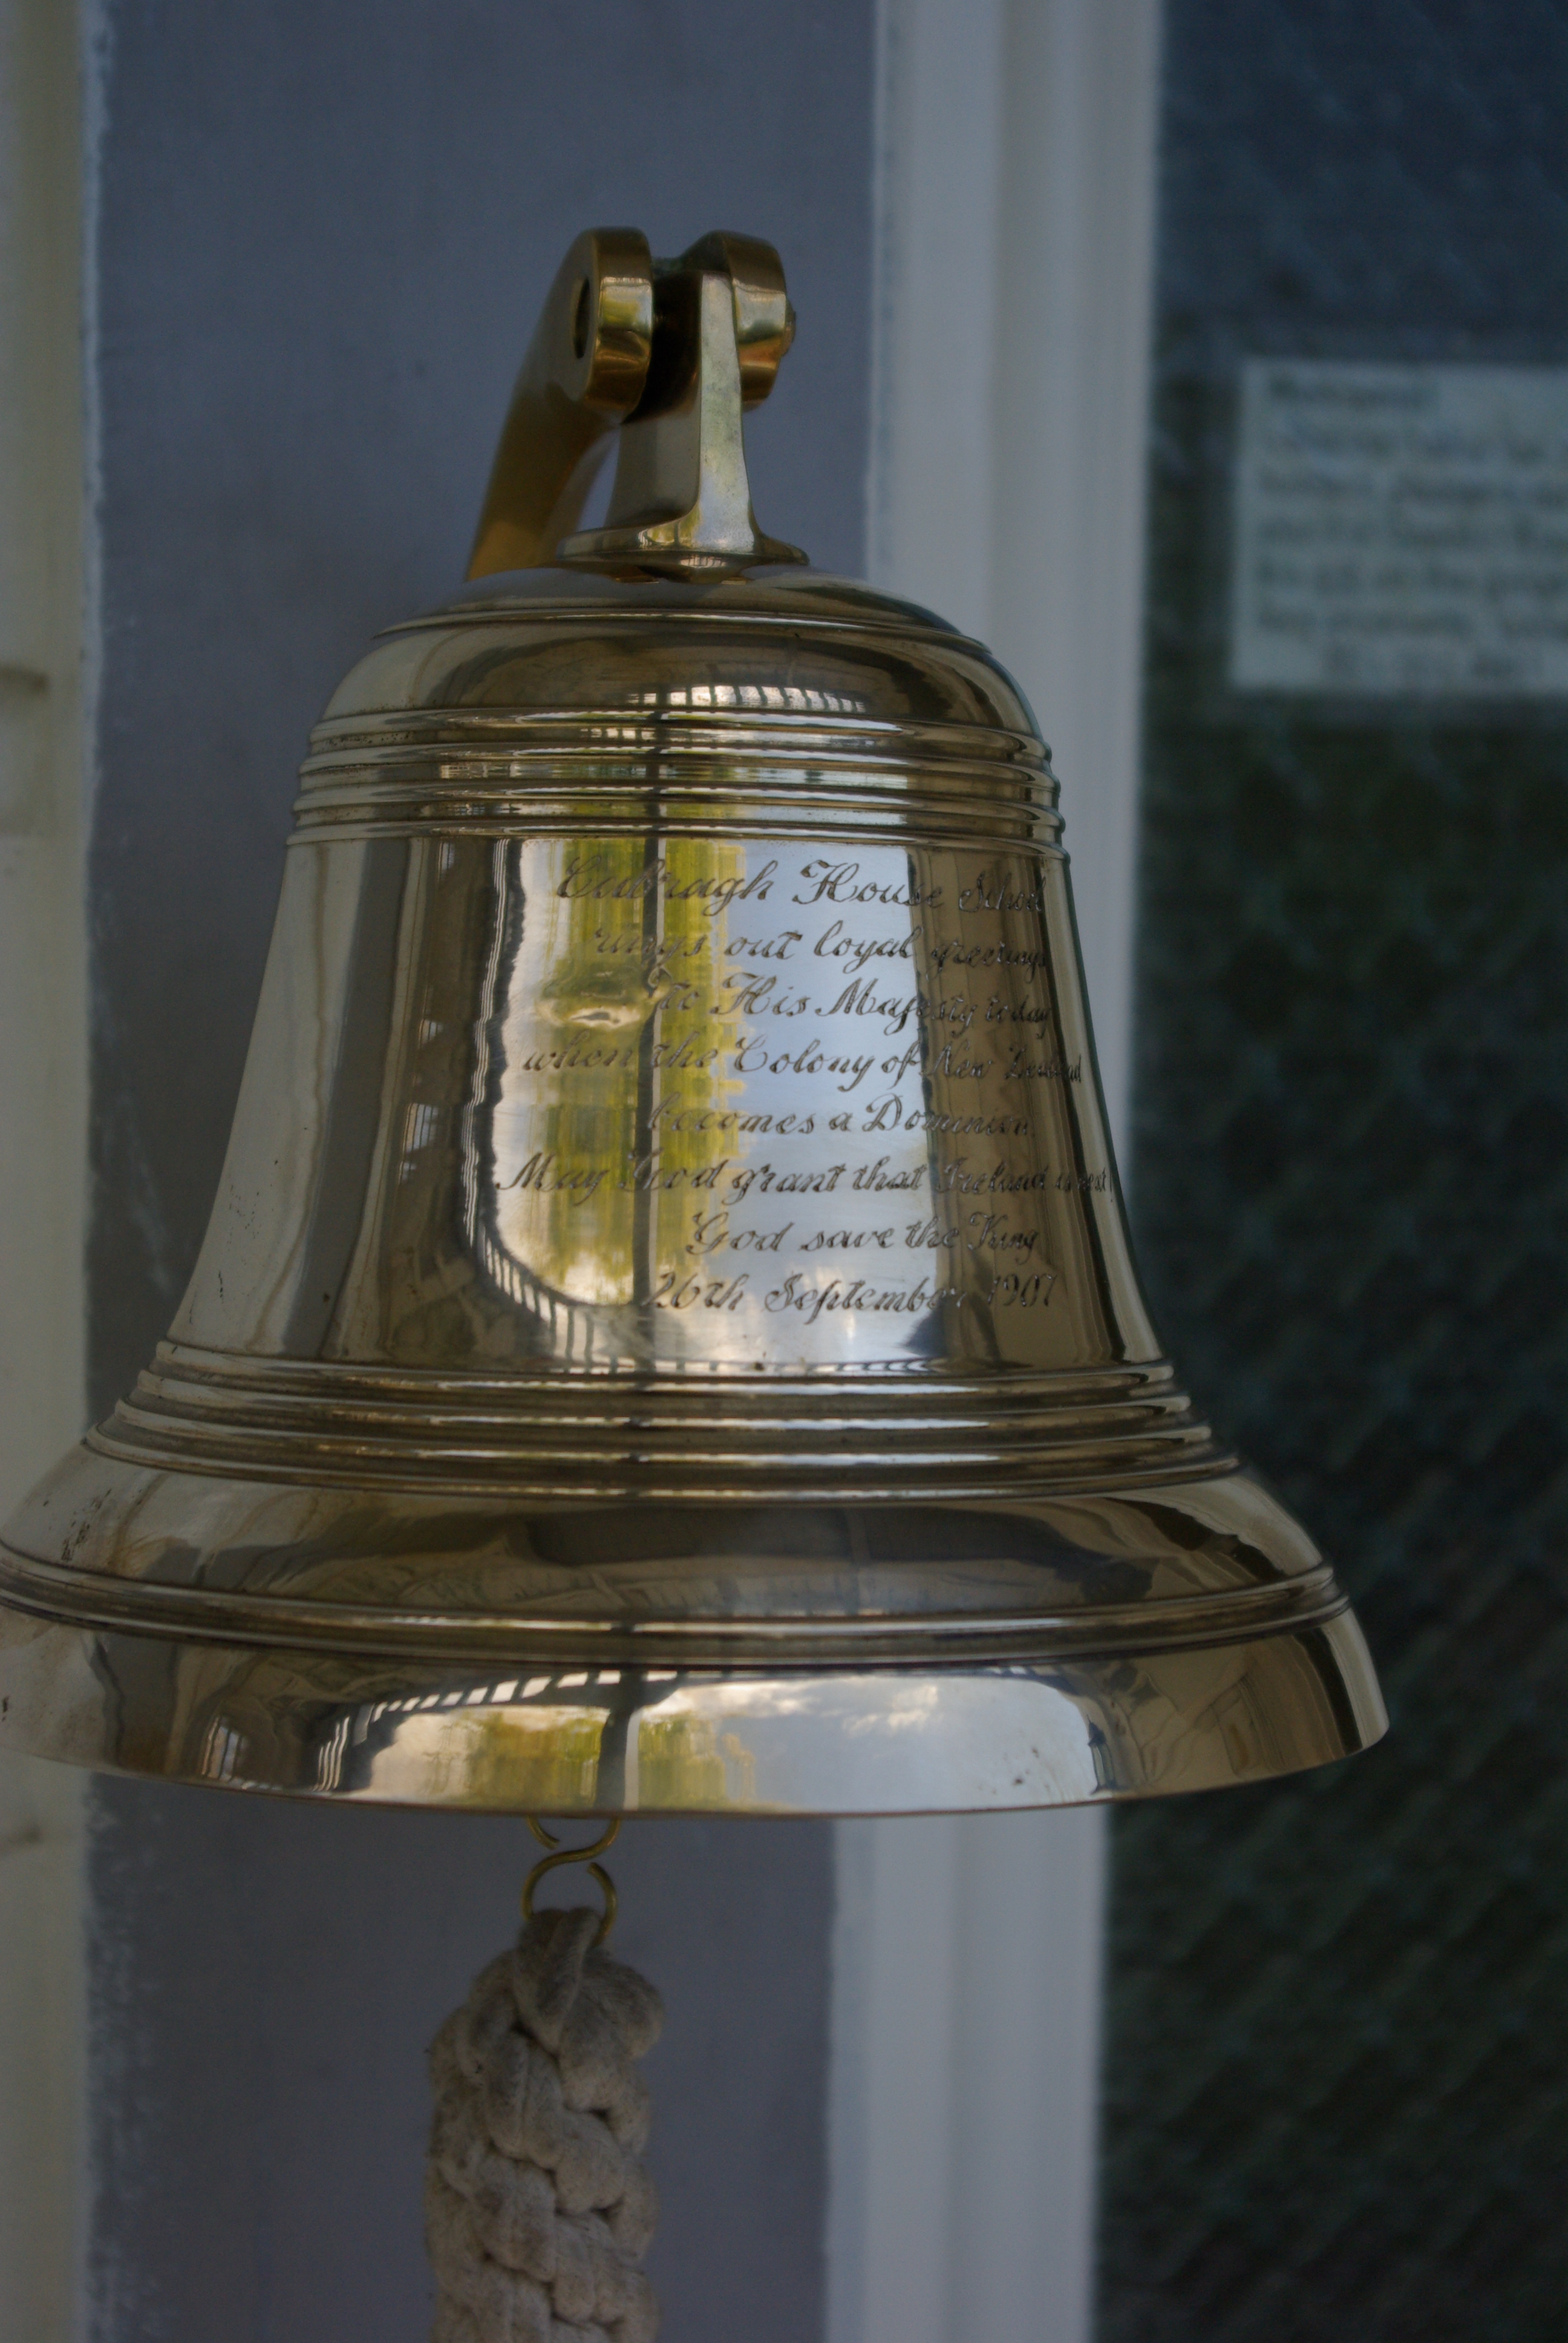 The 1907 brass bell from Cabragh House School that hangs at the door of Amber House Bed and Breakfast in the Nelson-Tasman region of the South Island of New Zealand